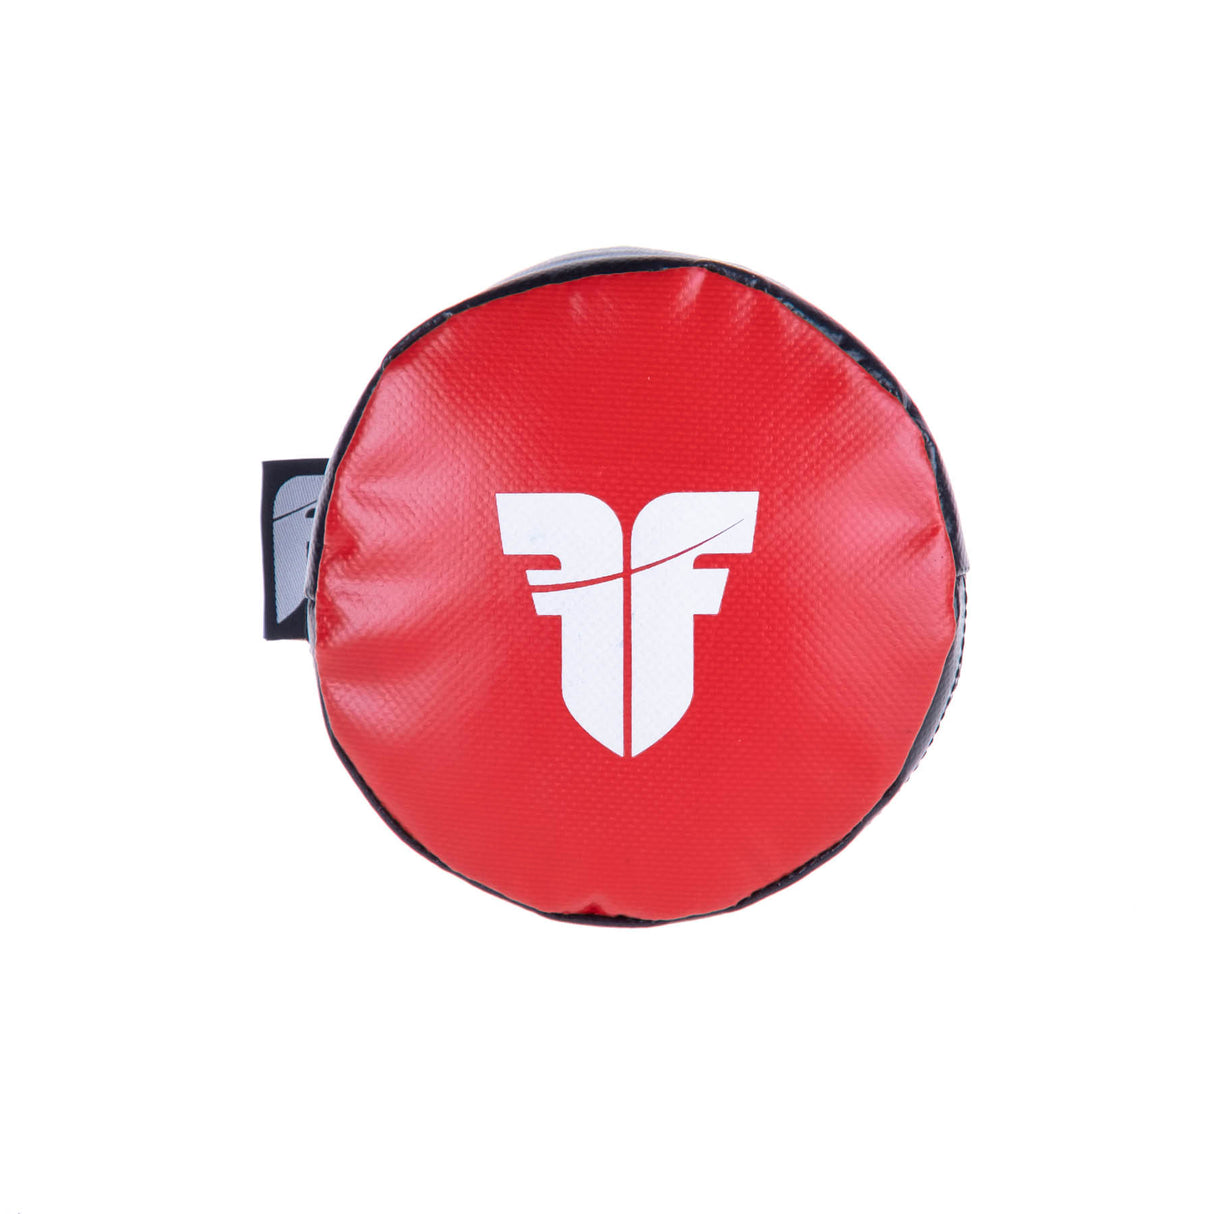 Fighter Round Target MINI - rot, FLM-1-RD